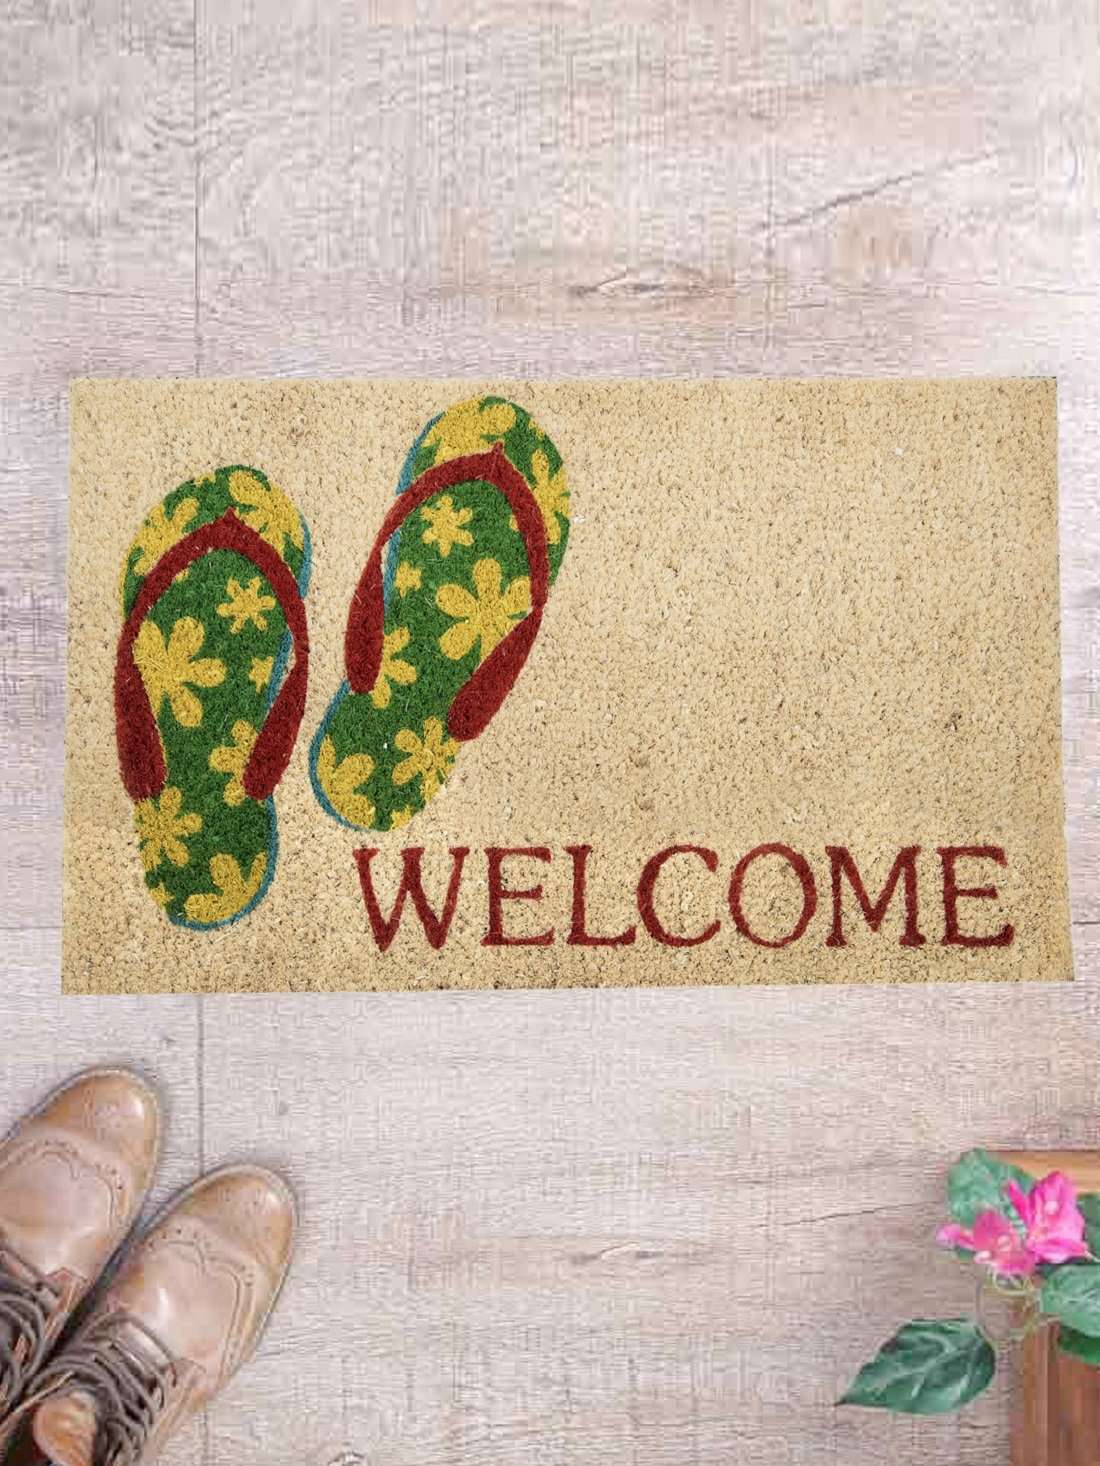 SWHF Premium Coir and Rubber Quirky Design Door and Floor Mat : Flip-Flop Welcome - SWHF